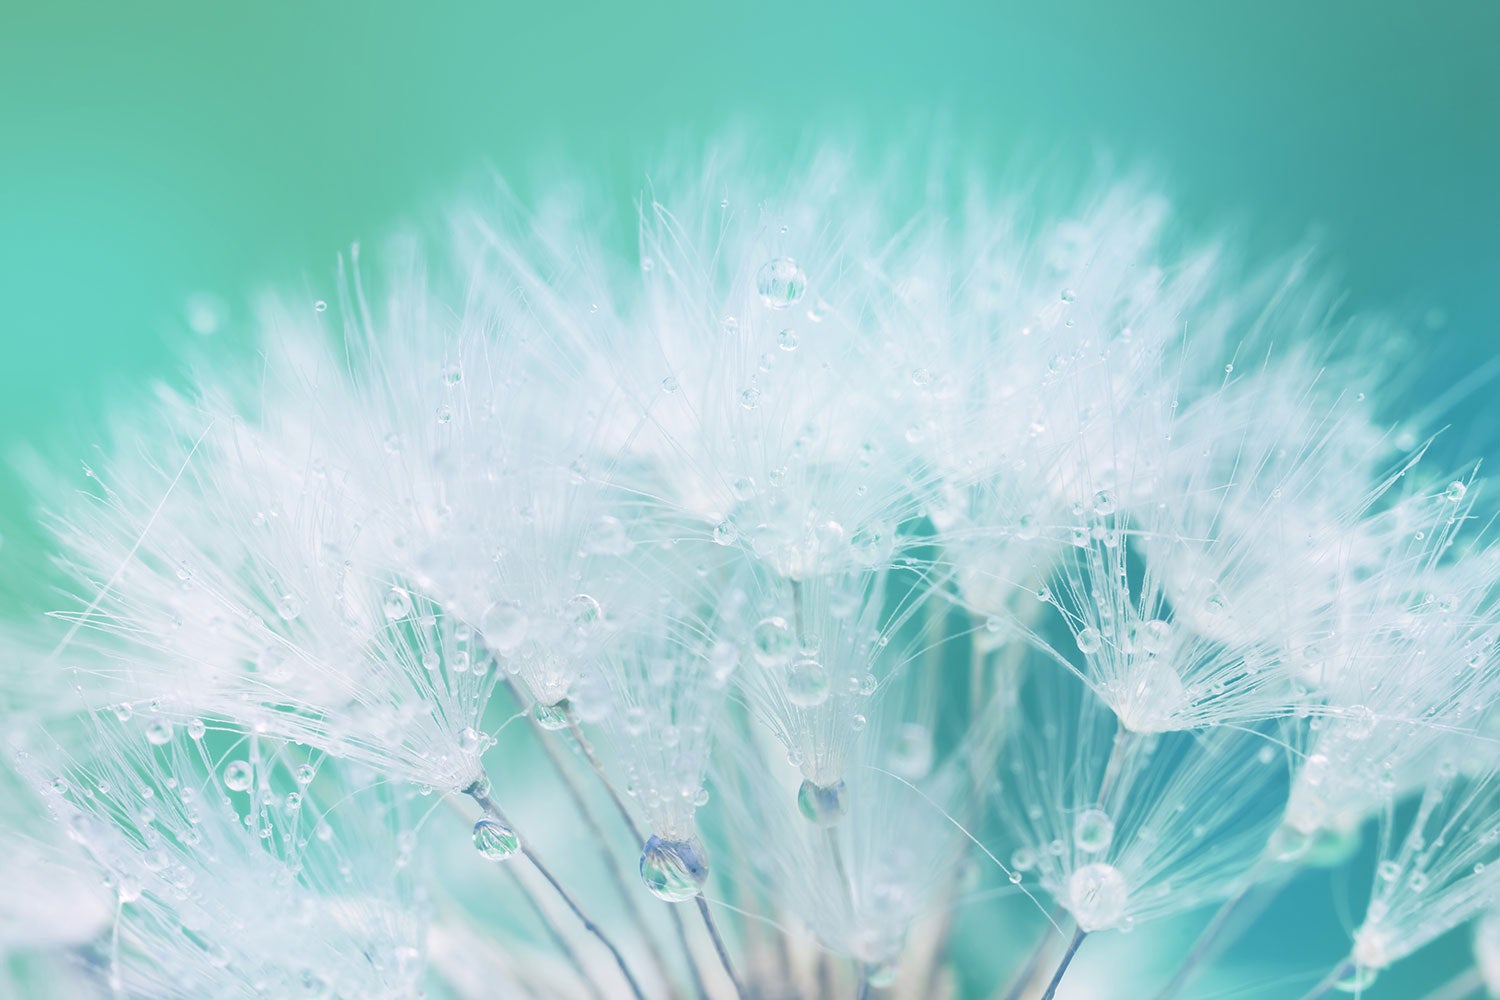 Wall Mural Photo Wallpaper Close Up Dandelion In Morning Dew